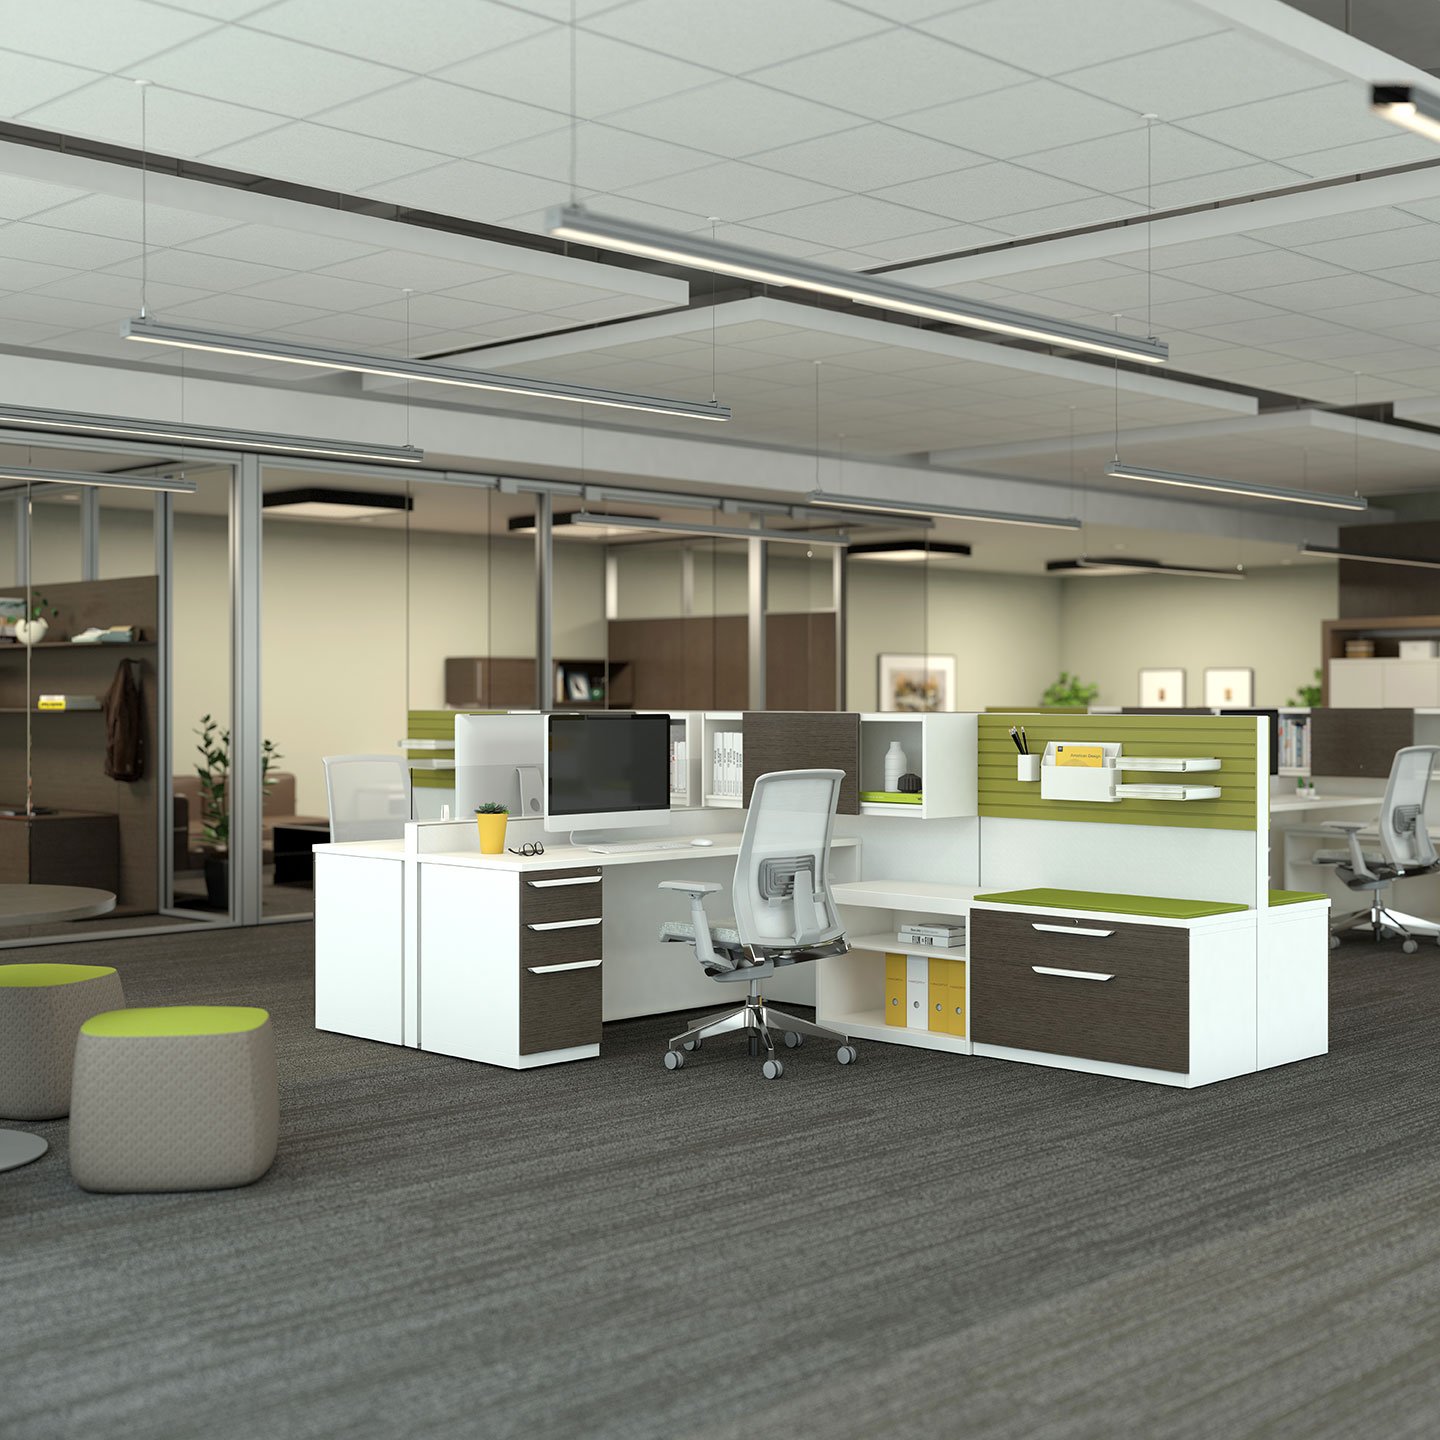 Haworth X Series Desks in white laminate in open office space with green dividers for privacy and grey chair at desk